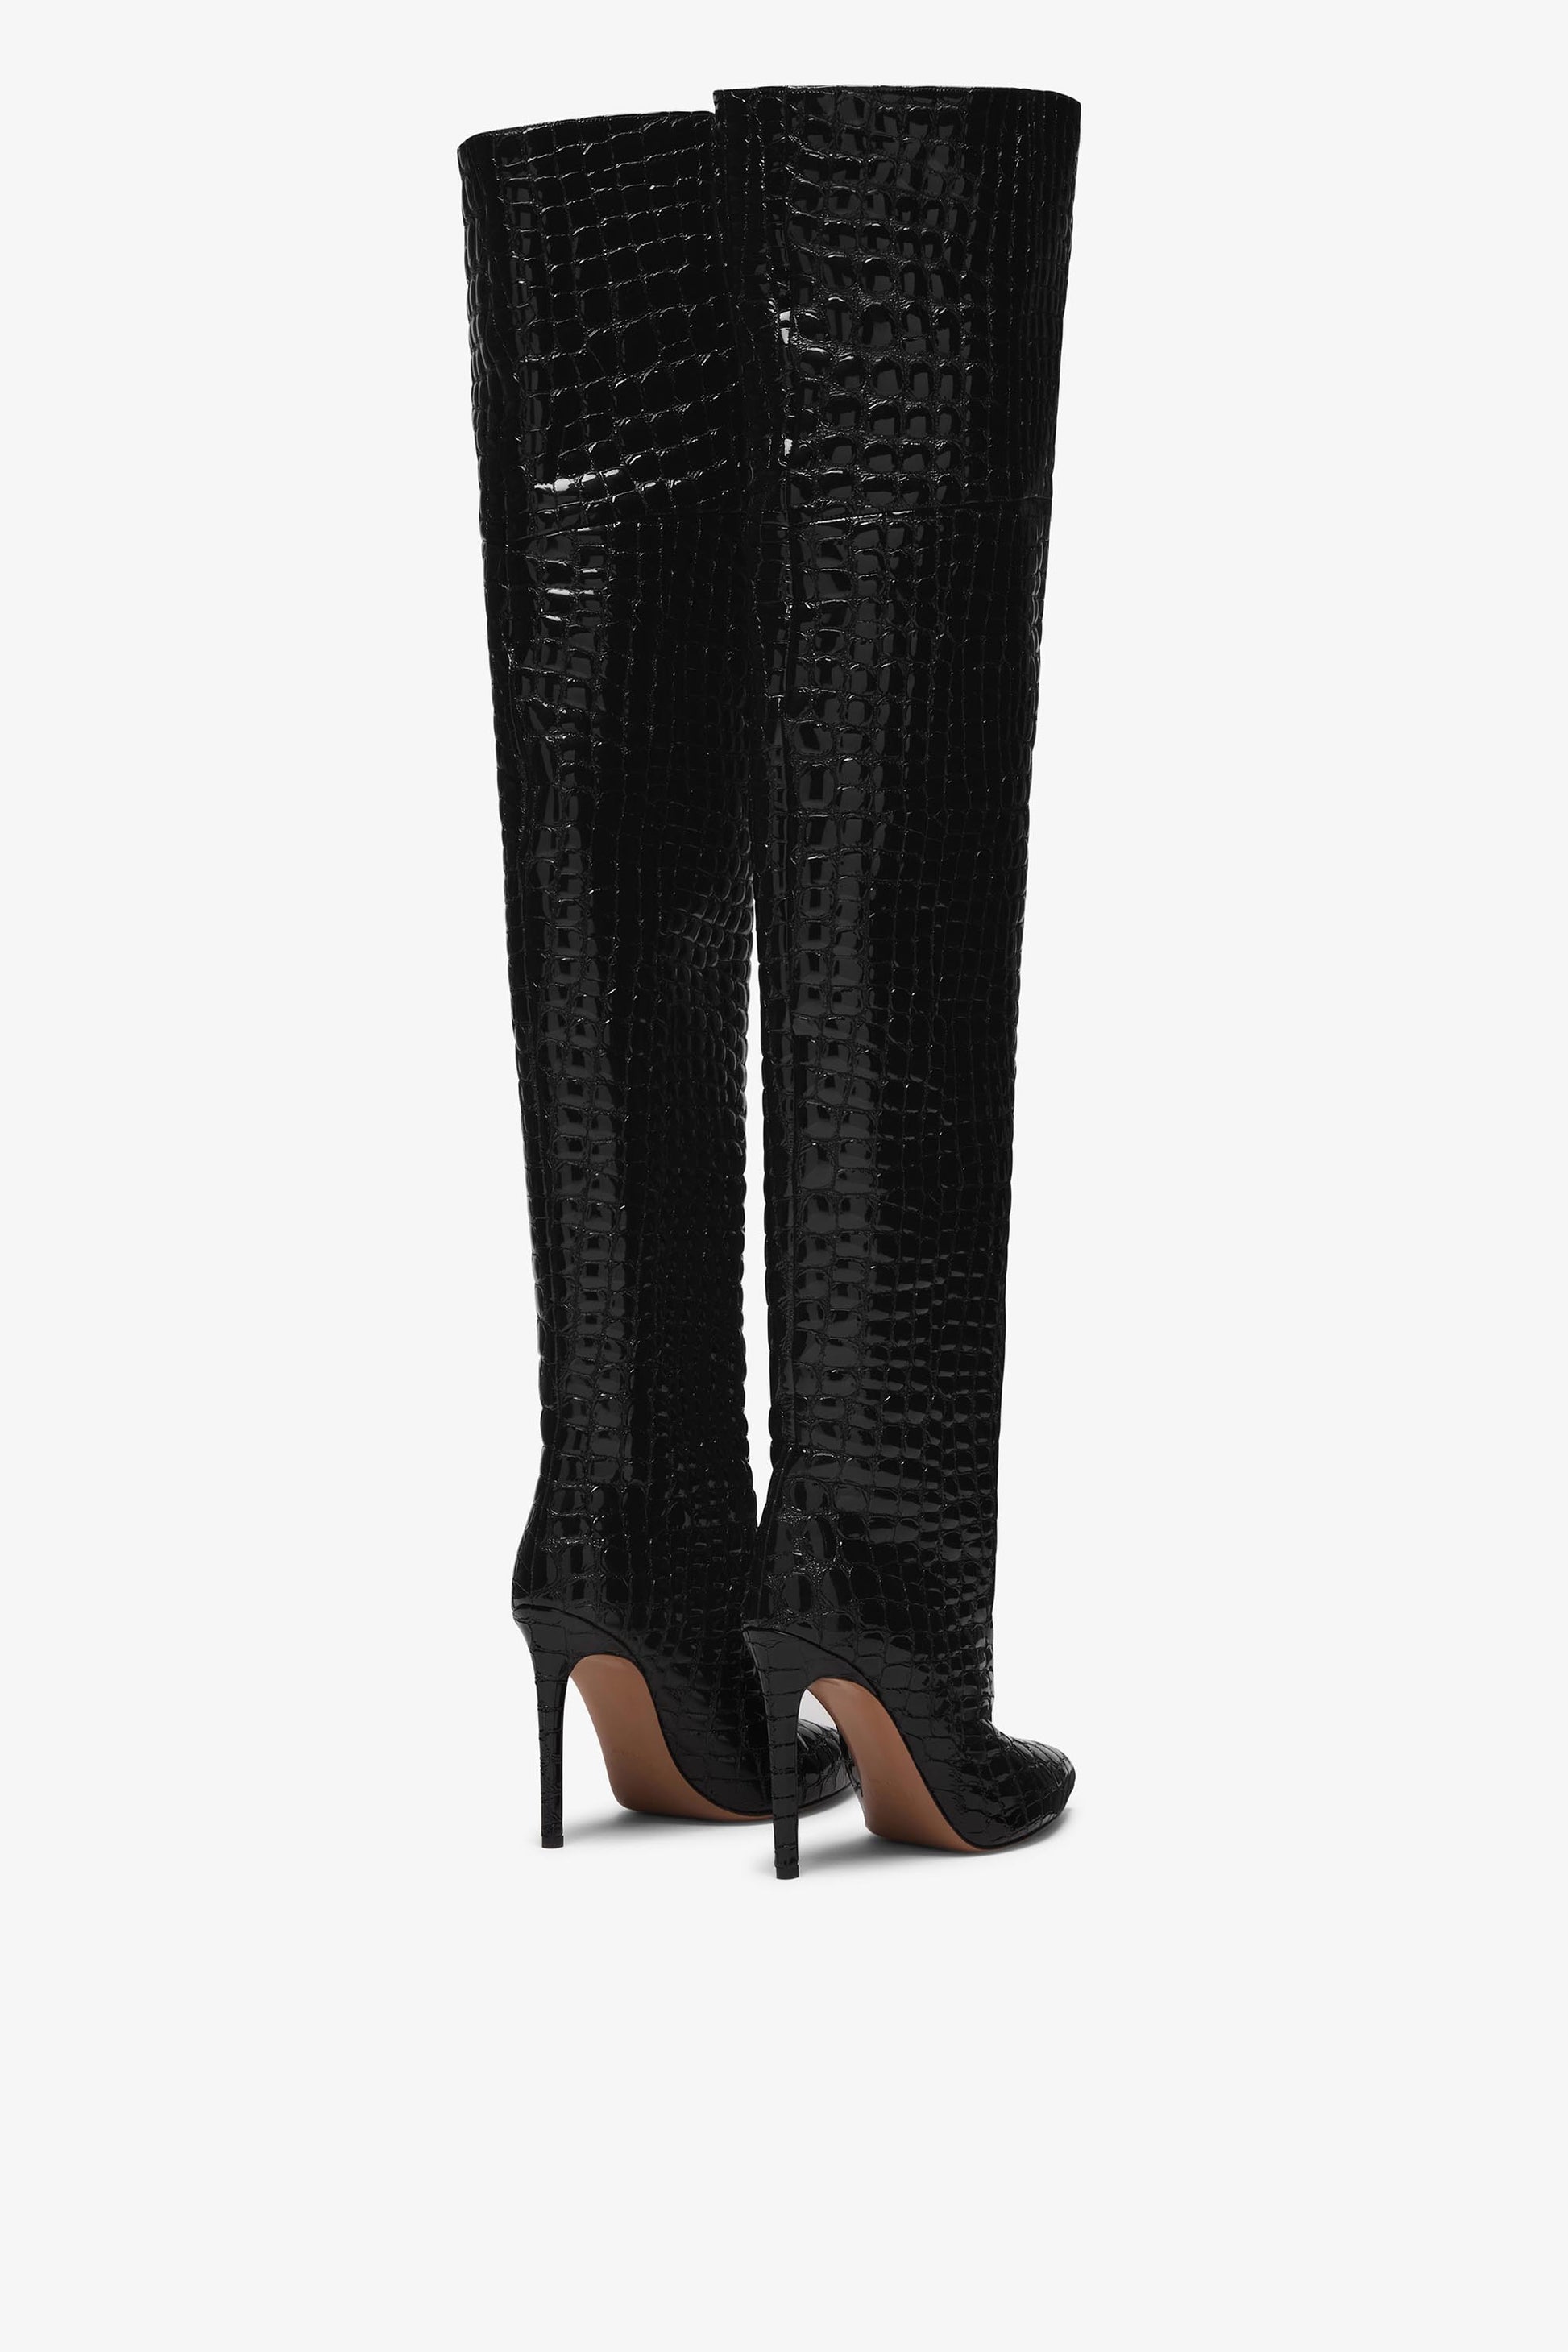 Over-the-knee black leather boot